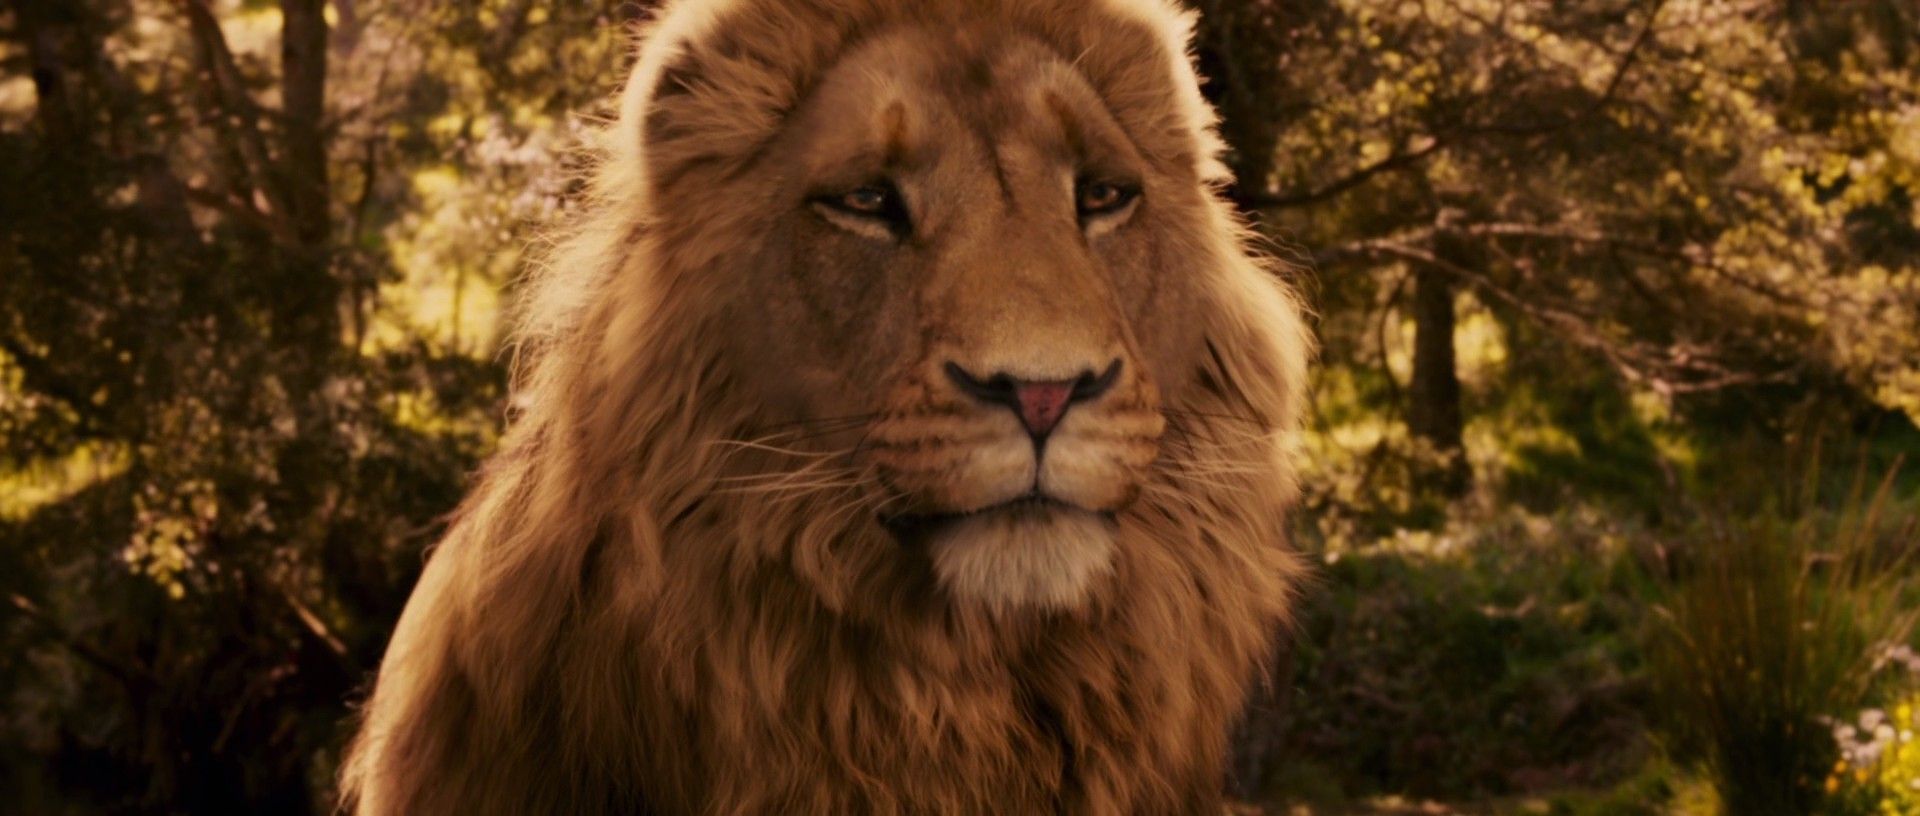 Pictures Of Narnia The Lion The Witch And The Wardrobe - Wallpaper